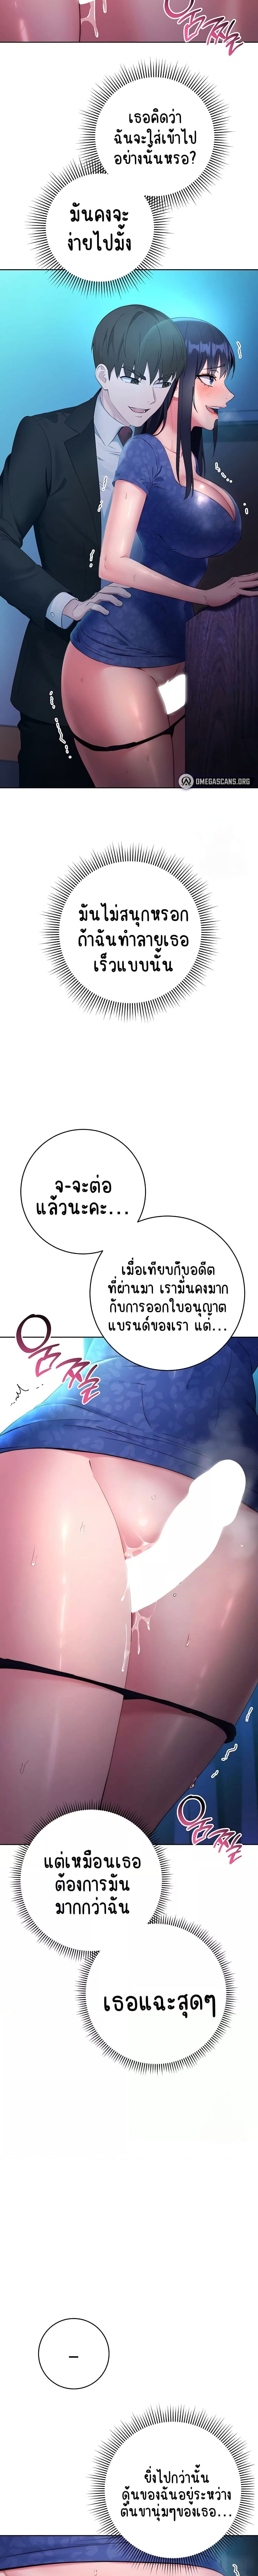 Outsider: The Invisible Man ตอนที่ 5 ภาพ 8